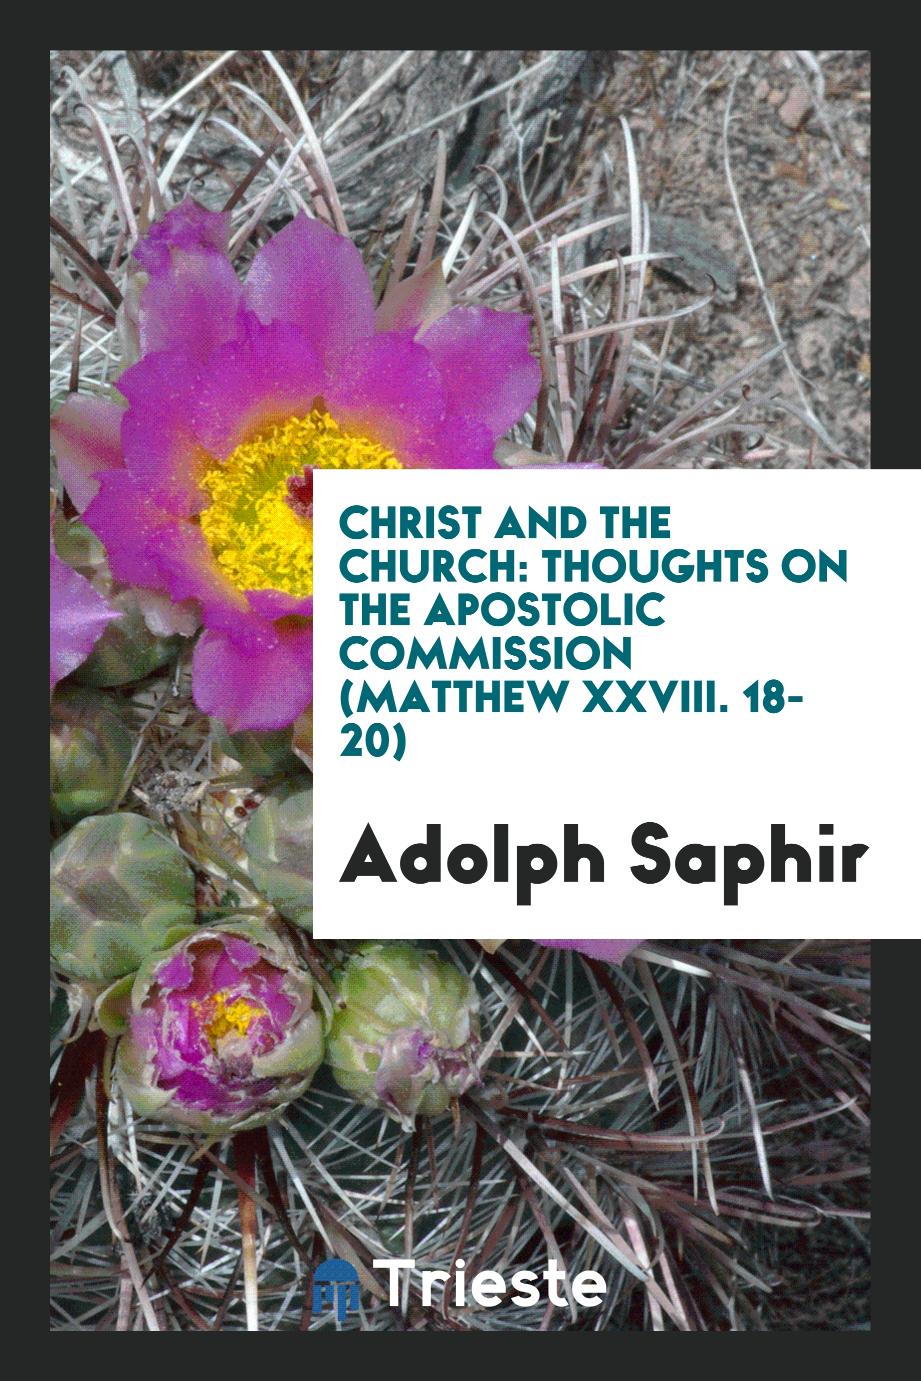 Christ and the Church: Thoughts on the Apostolic Commission (Matthew xxviii. 18-20)